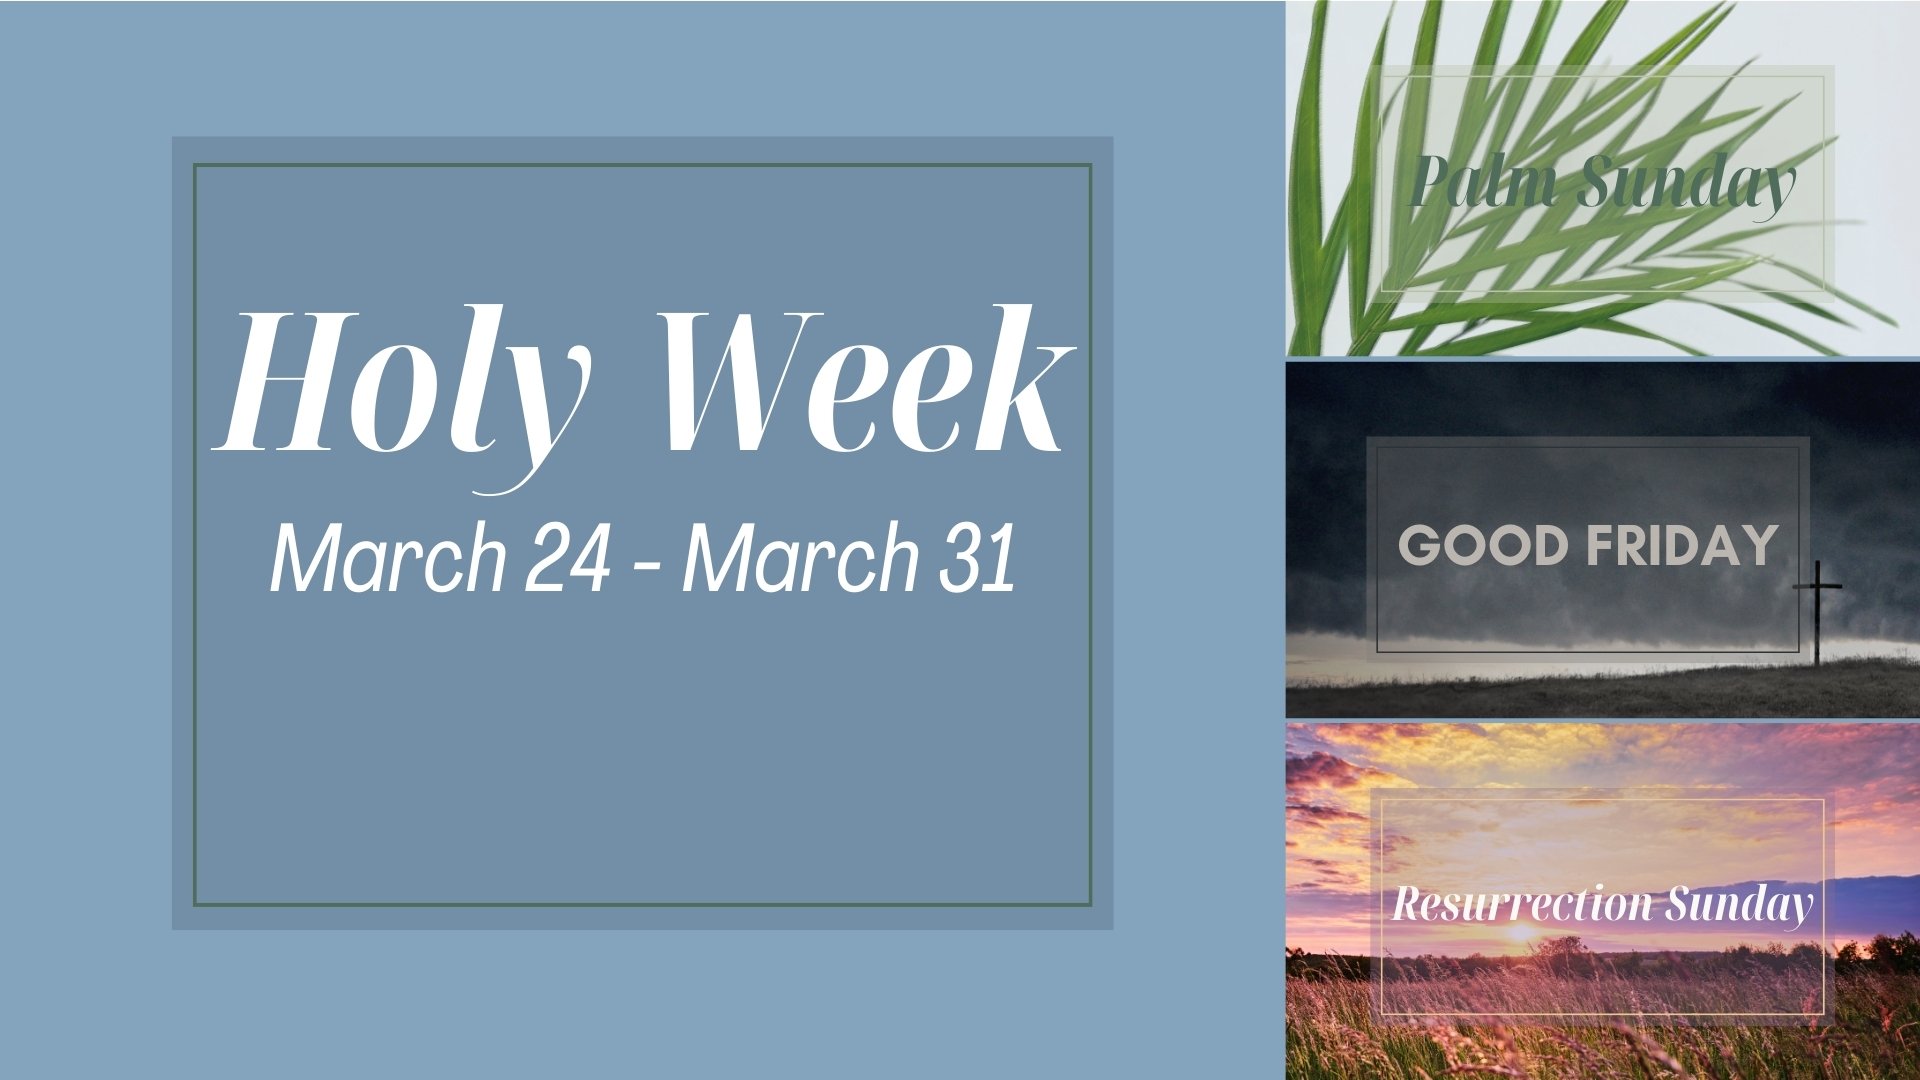 Holy Week invitation from Faith Lutheran Church of McLean County with graphic and text for Palm Sunday, Good Friday and Resurrection Sunday